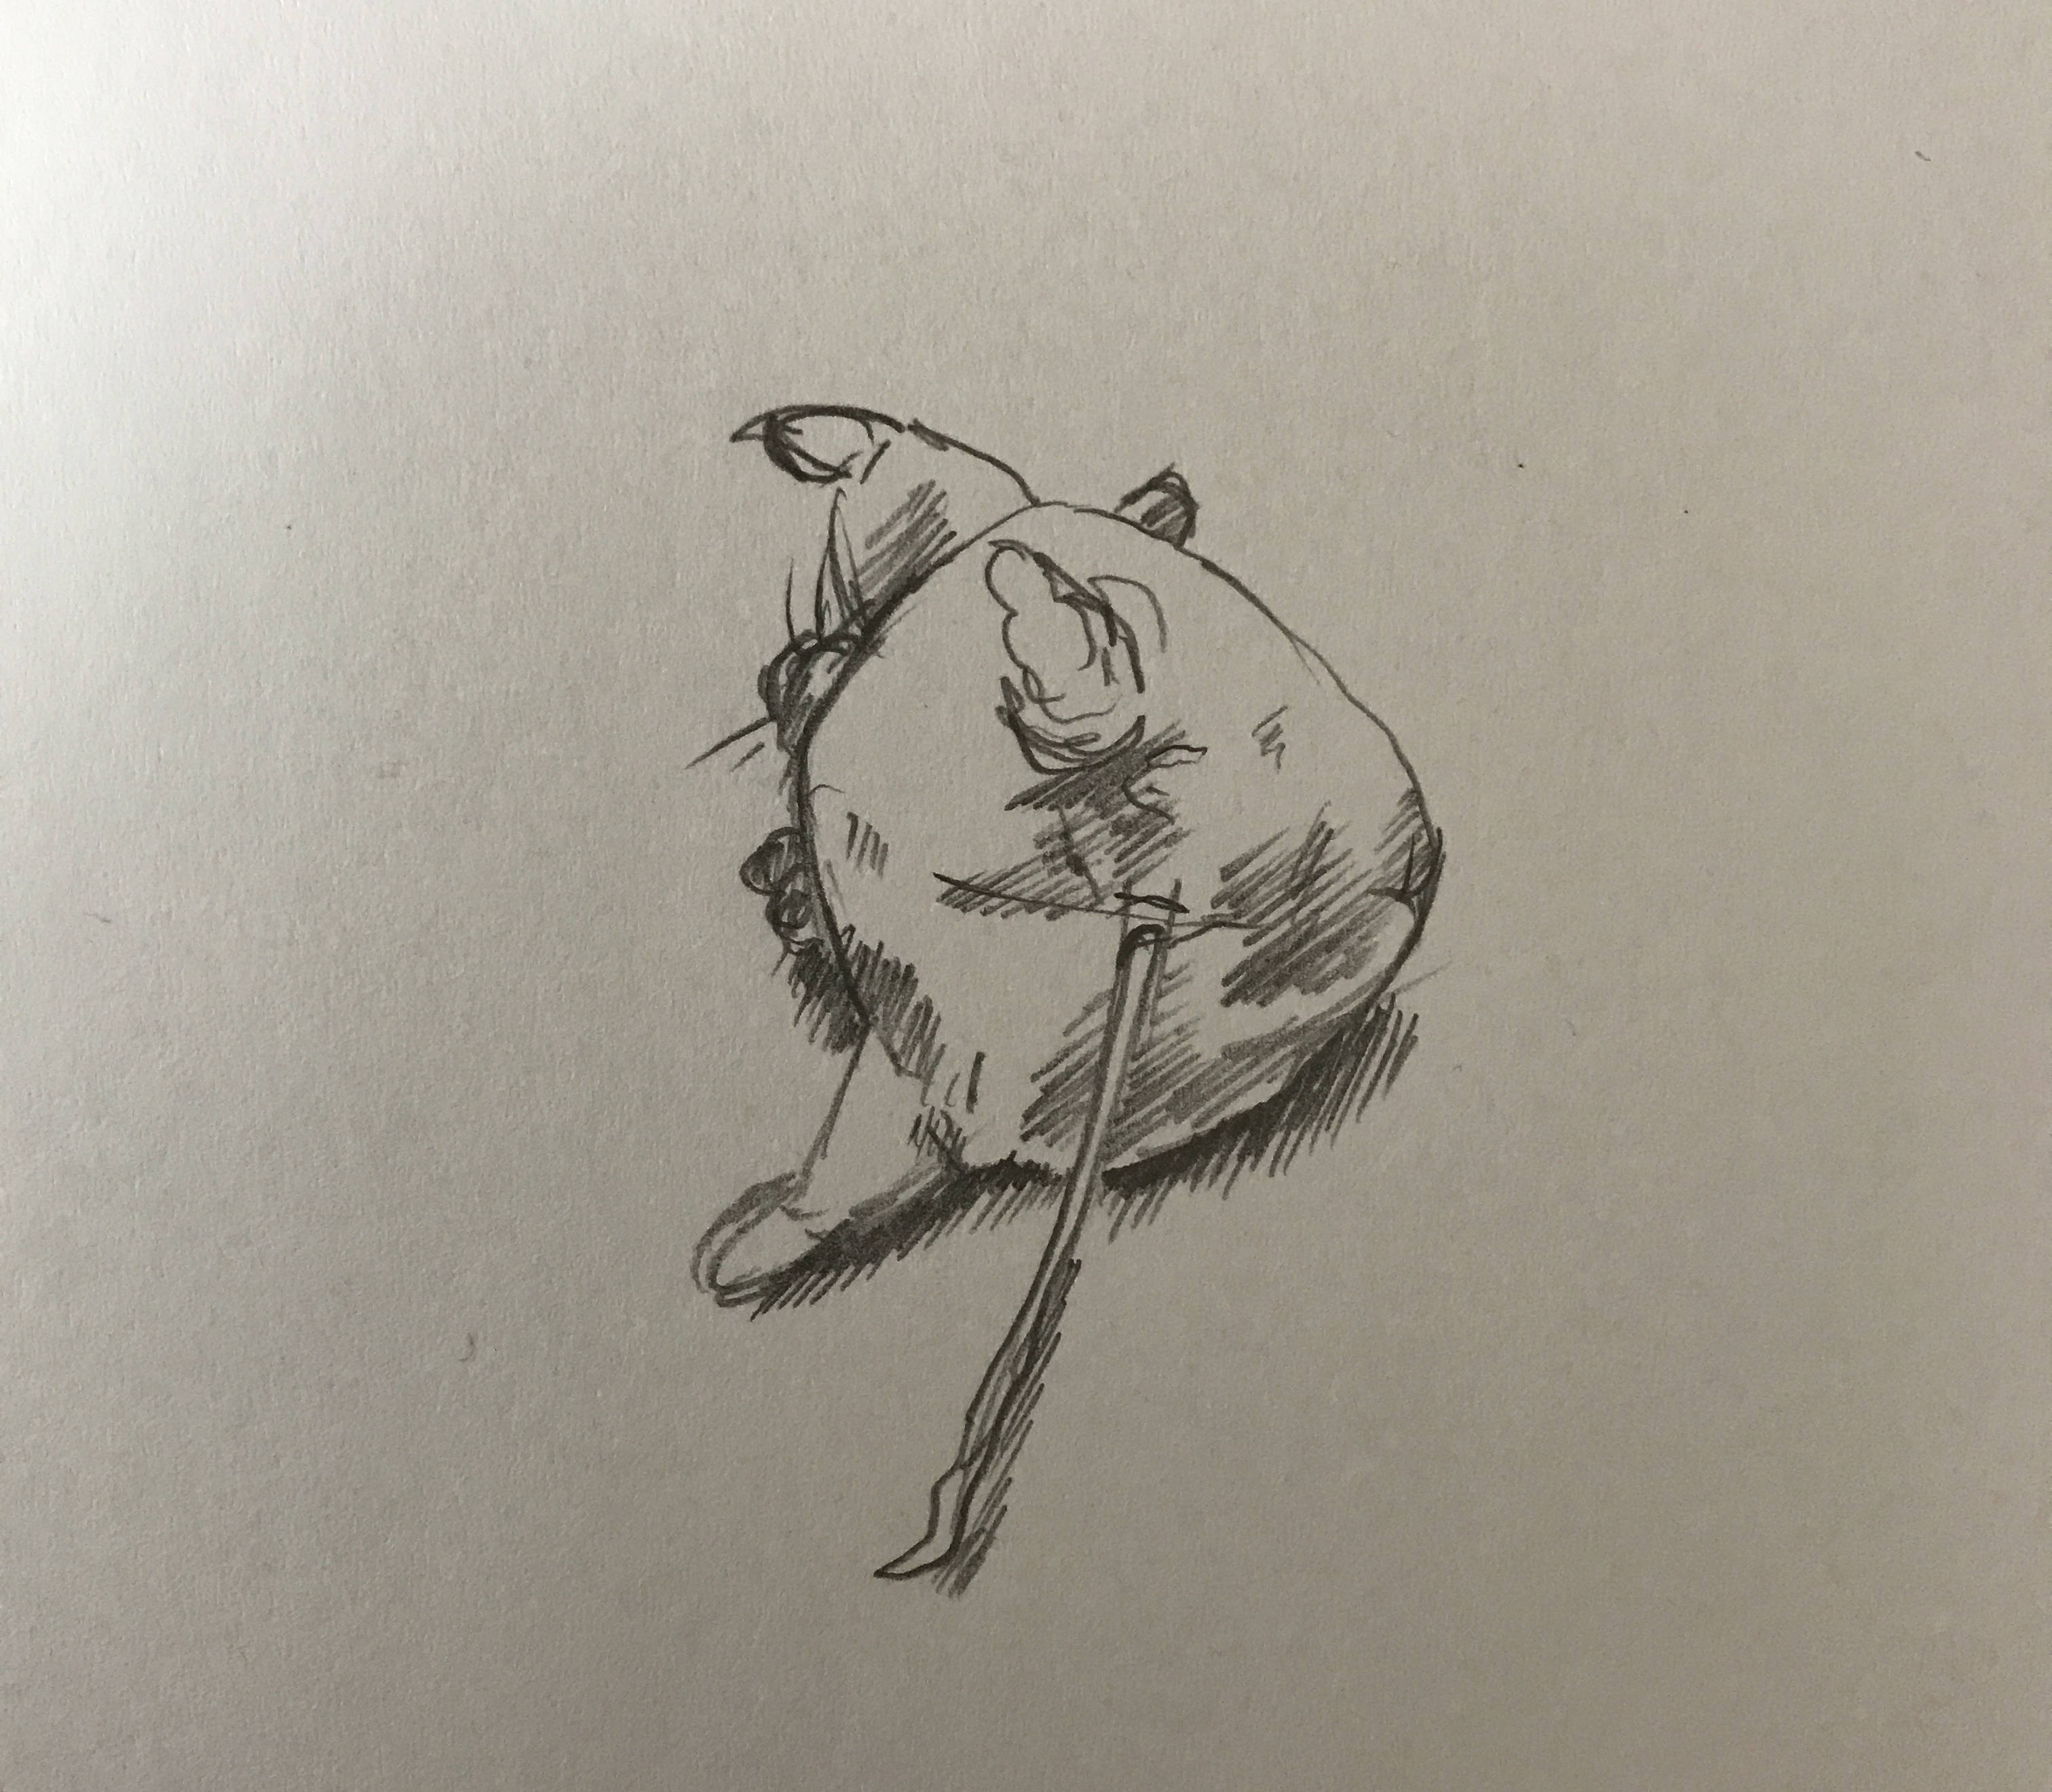 Pencil drawing of a stuffed rat toy.